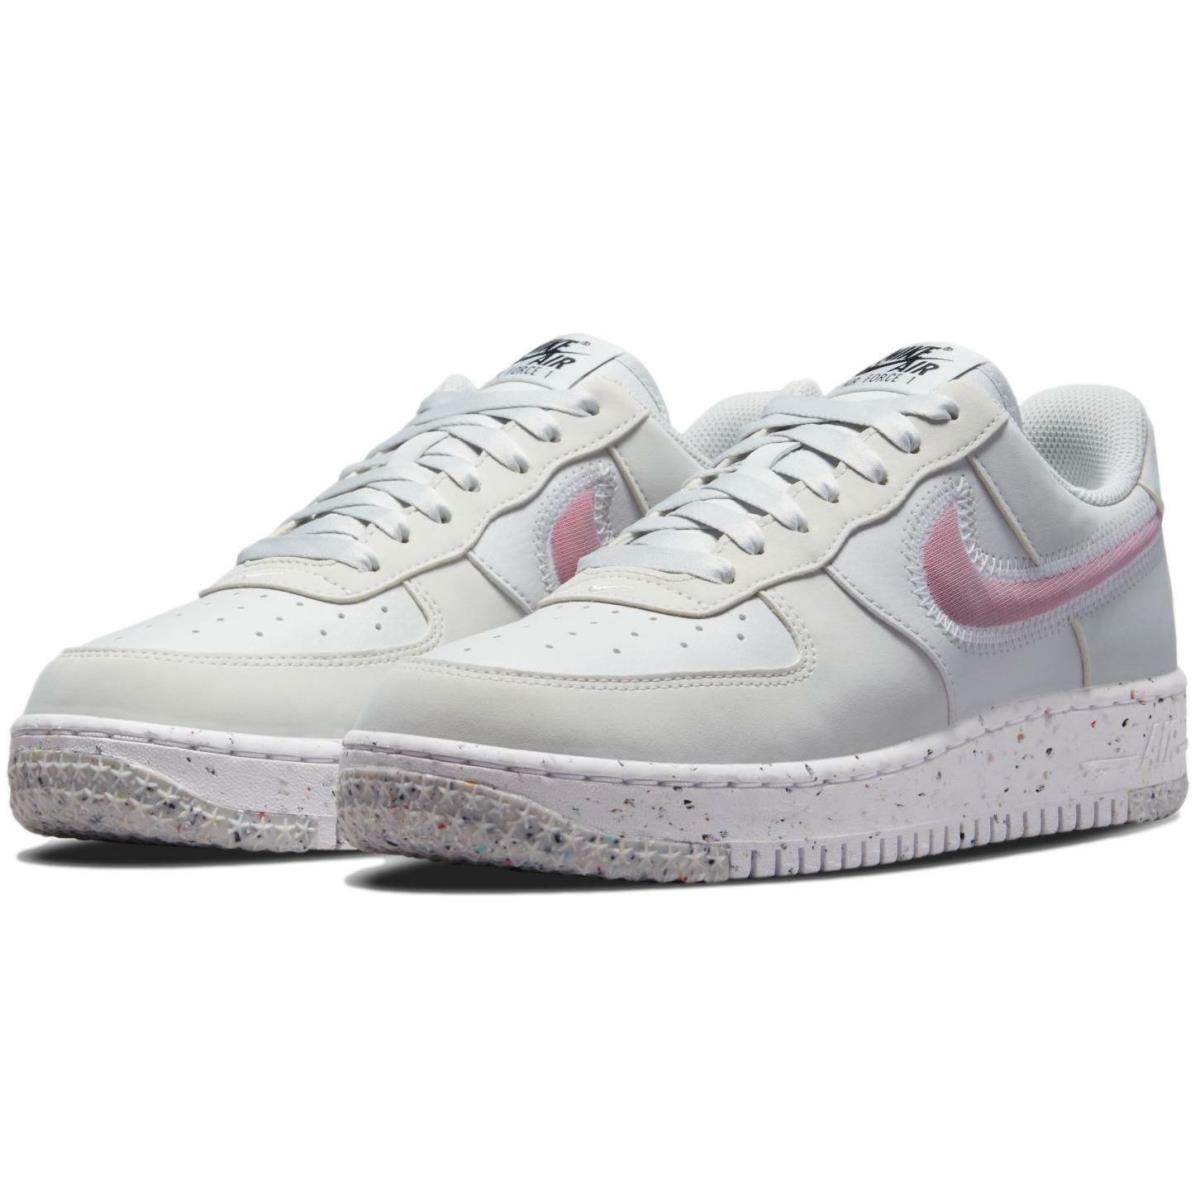 Nike Women`s Air Force 1 Crater `pink Prime` Shoes Sneakers DH0927-002 - Photon Dust/Rush Pink